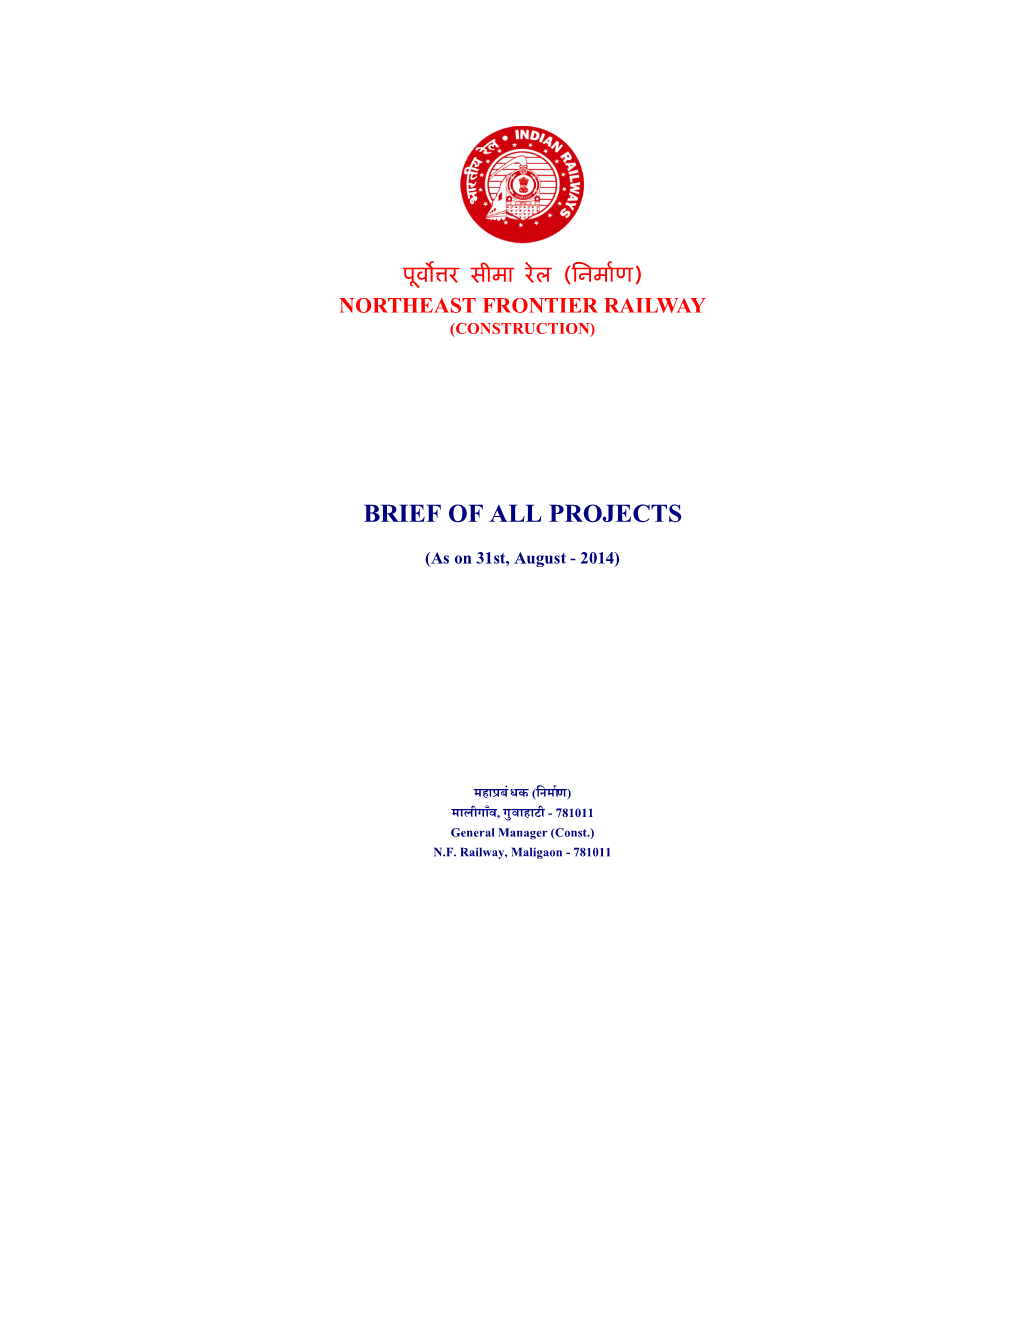 BRIEF of ALL PROJECTS (As on 31St, August - 2014)